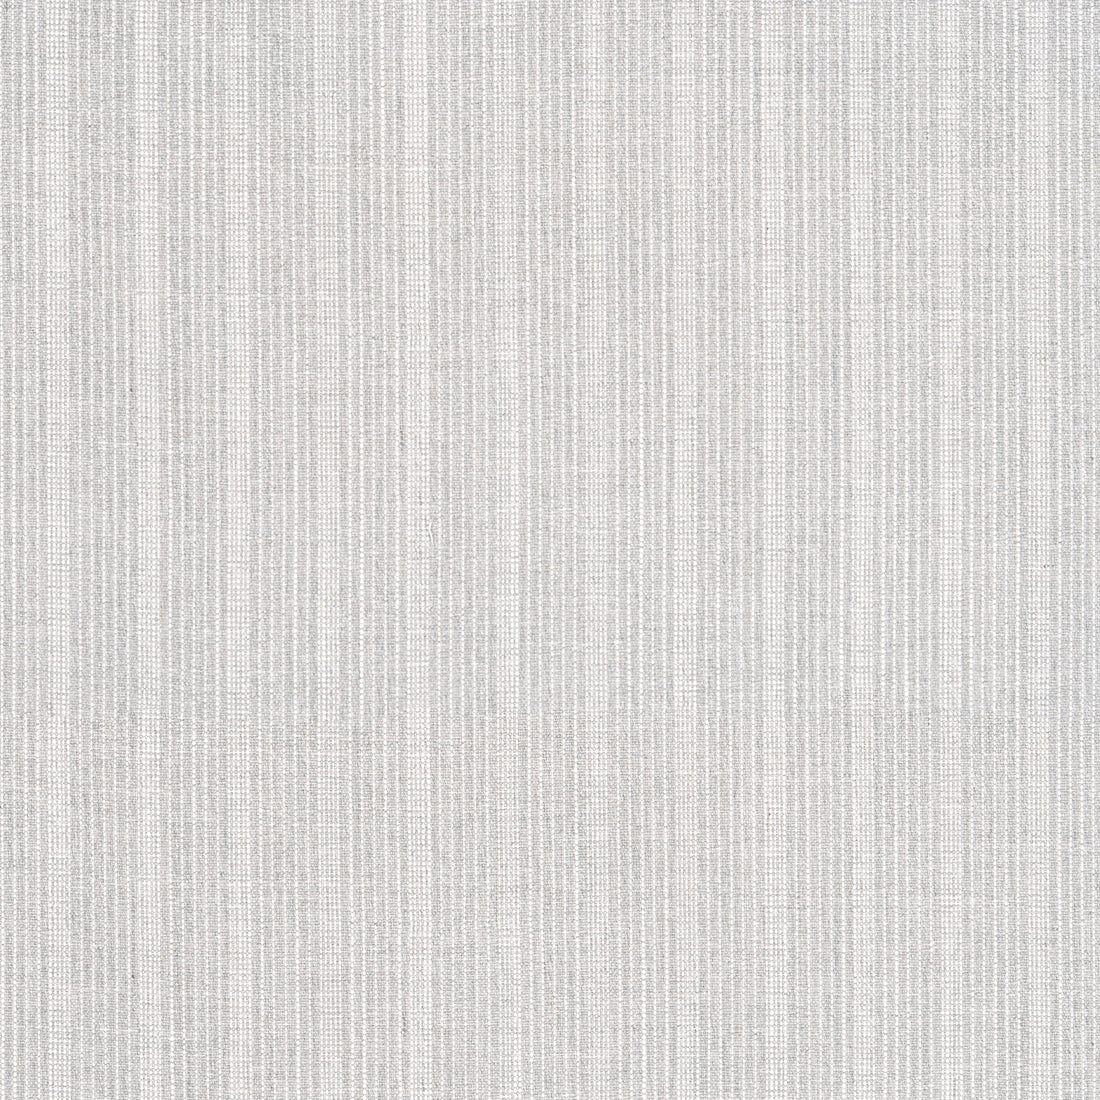 Ebro Stripe fabric in sterling color - pattern number W8507 - by Thibaut in the Villa collection